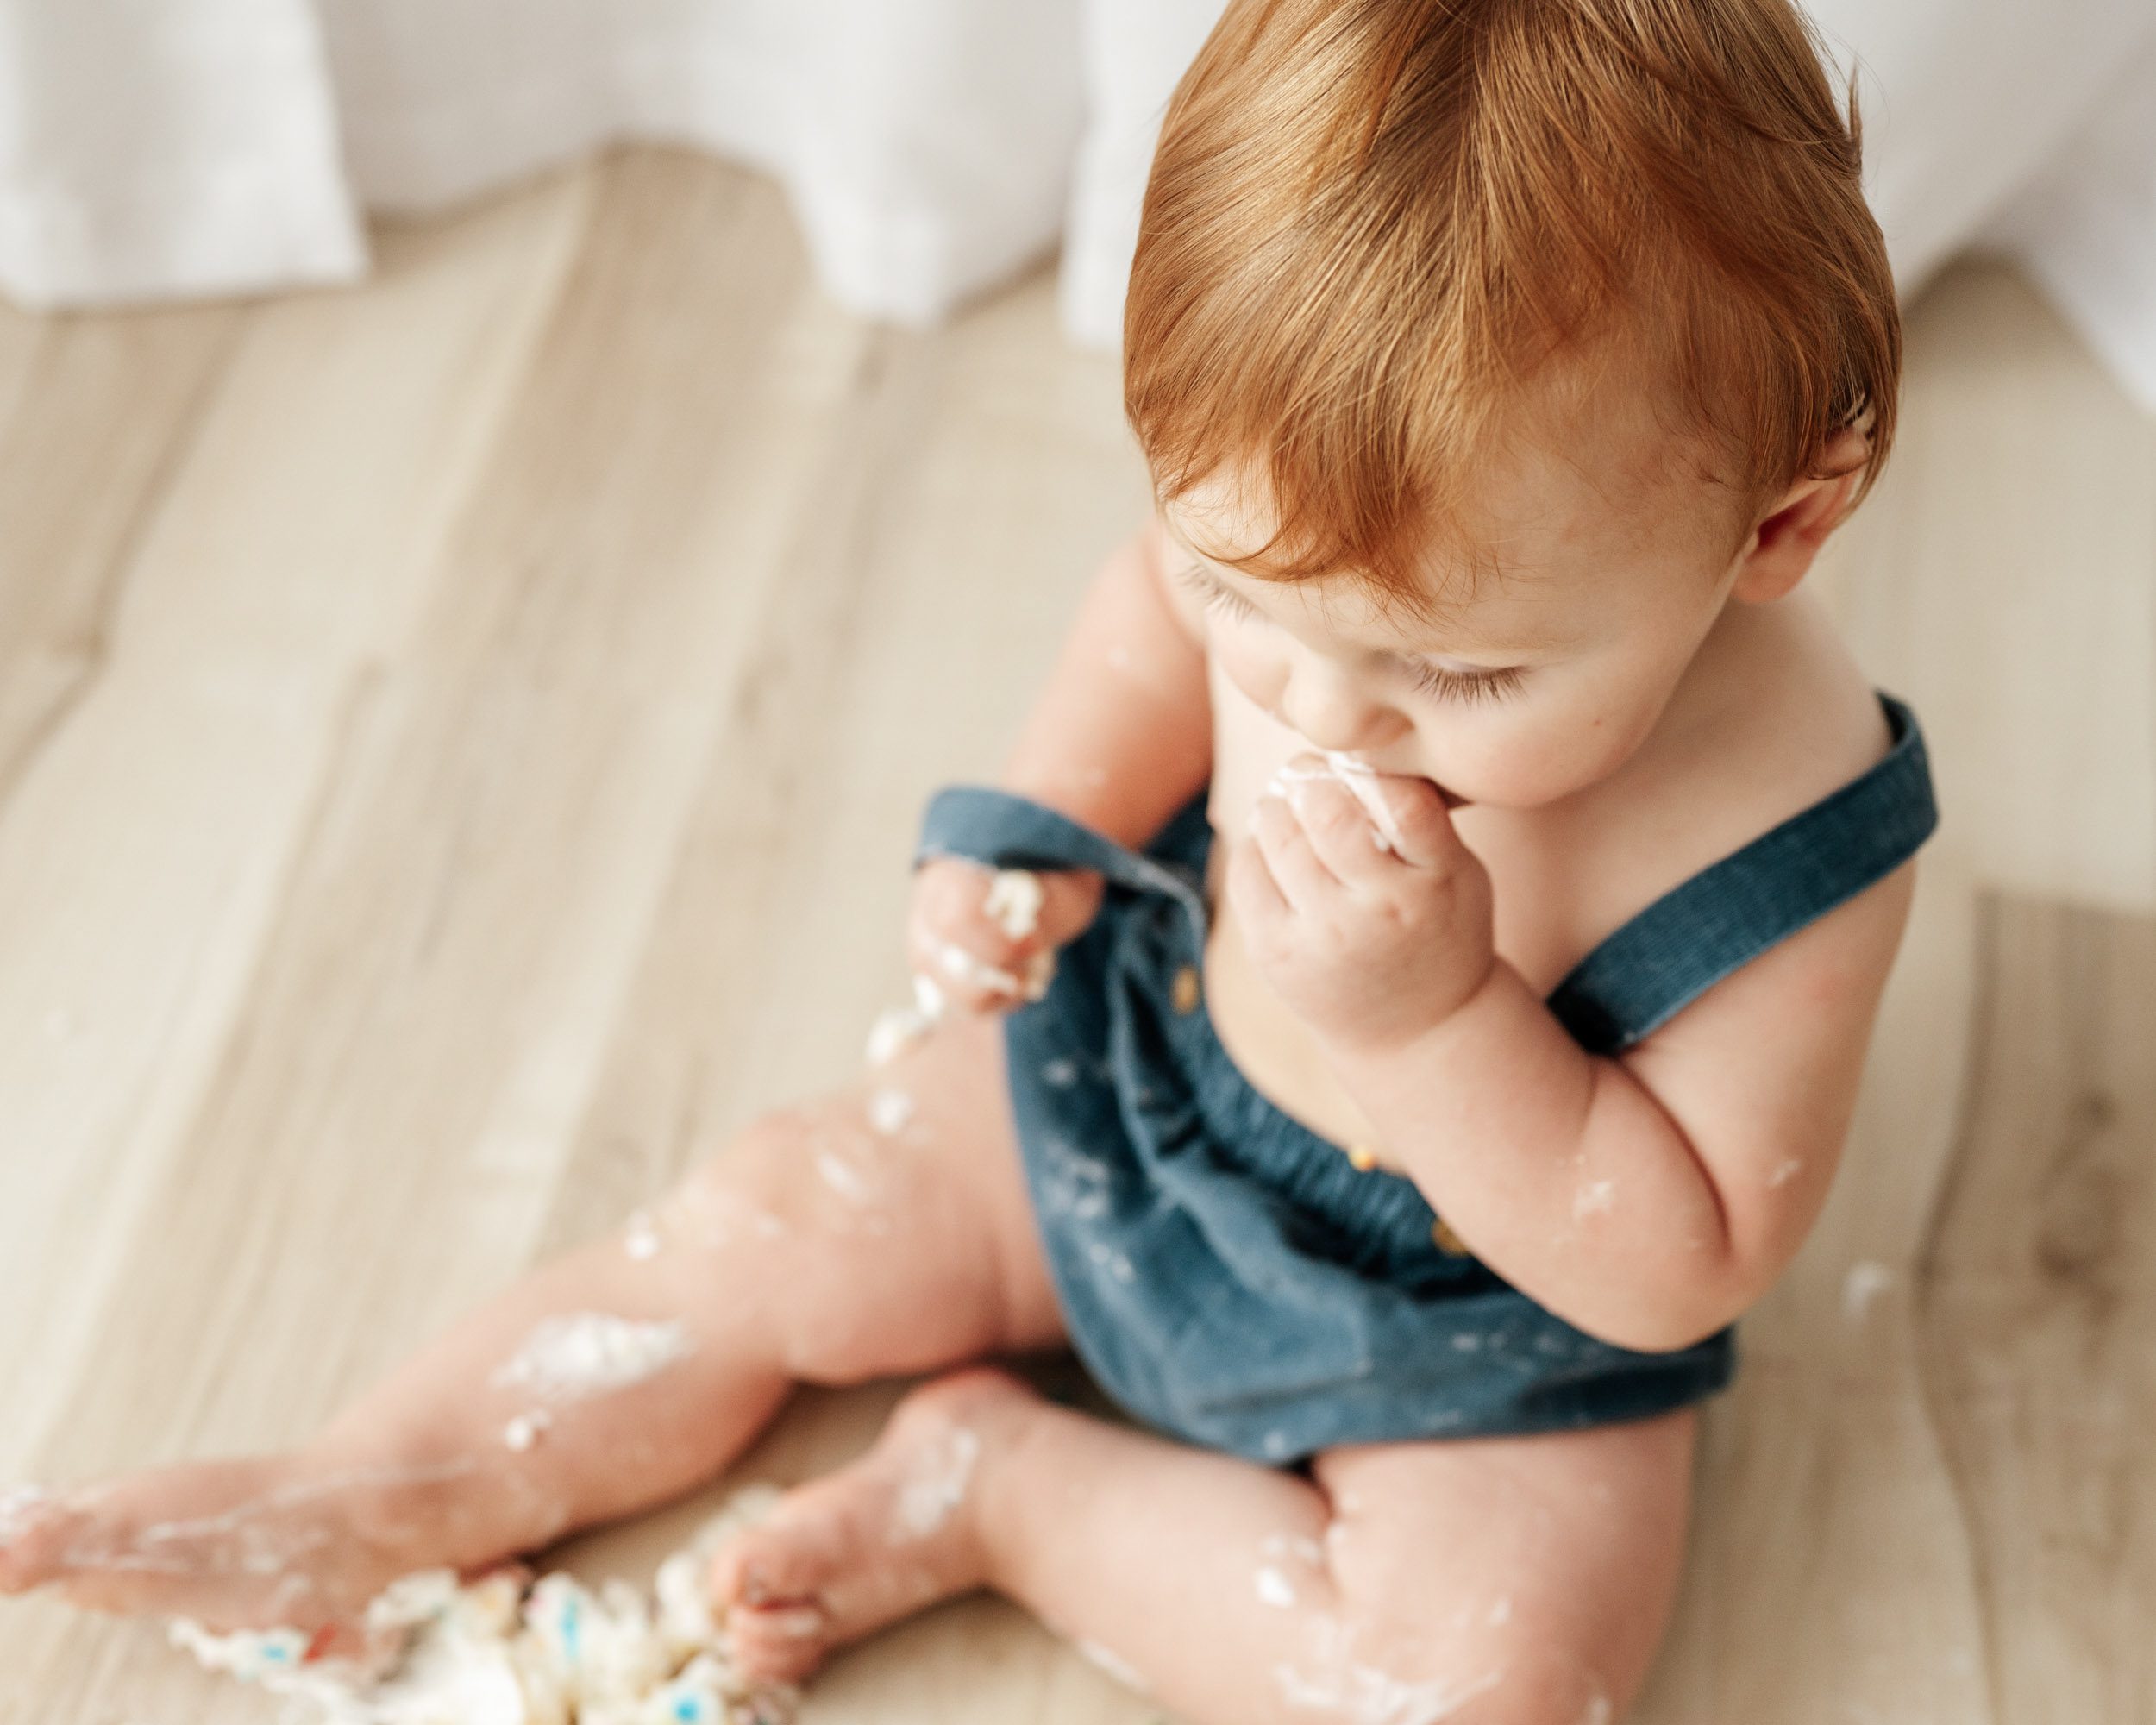 a picture taken from above of a boy sitting on the floor with cake all over his legs and arms as he puts a piece of cake in his mouth during a 1st birthday cake smash photoshoot